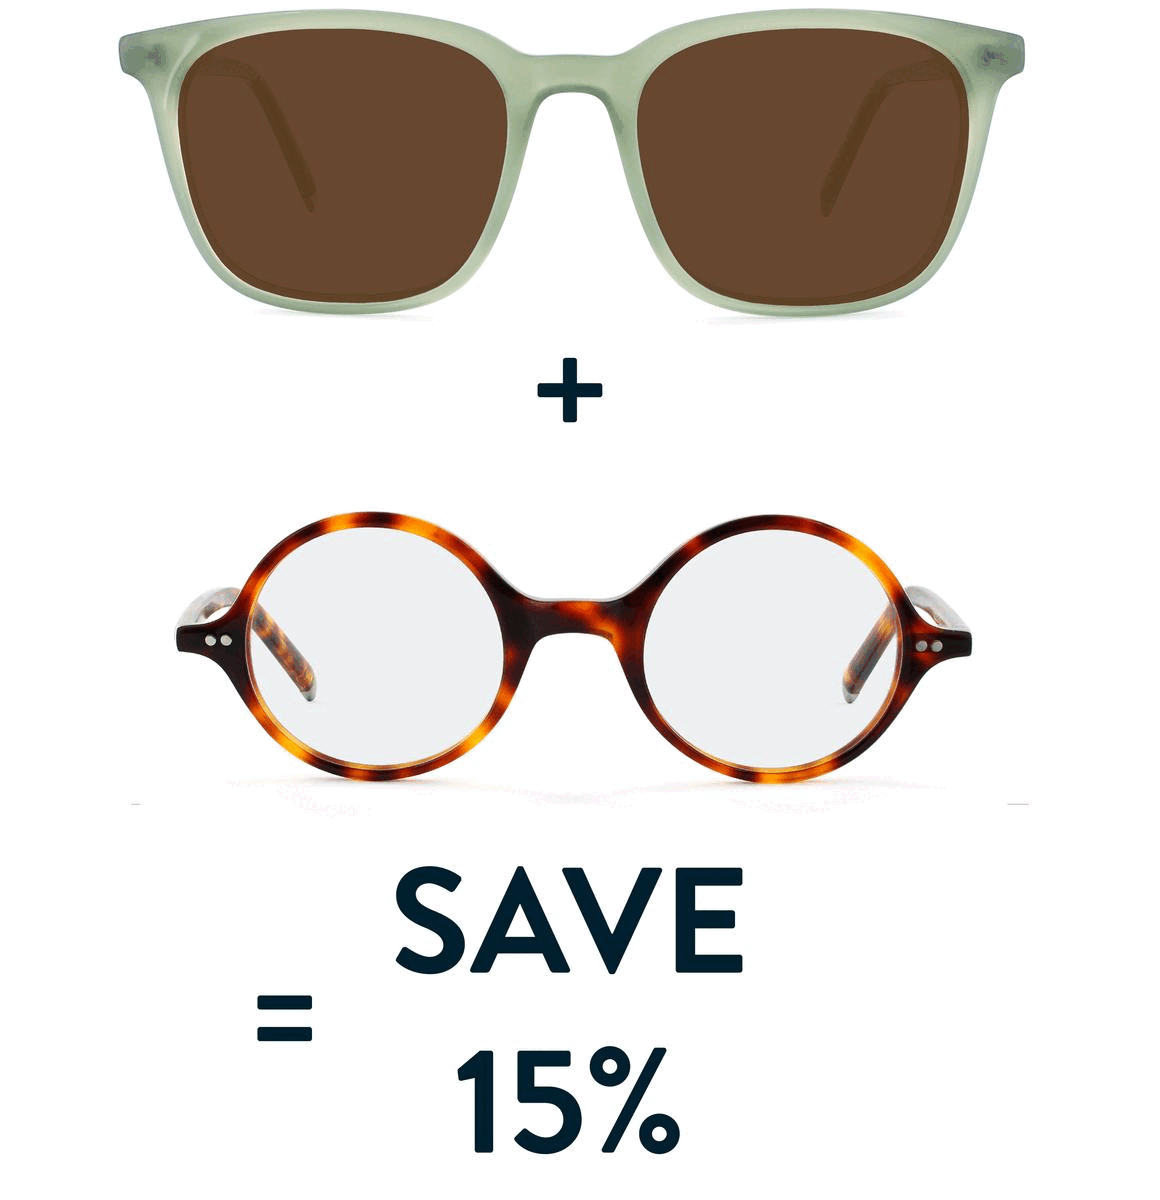 Save 15% on two or more